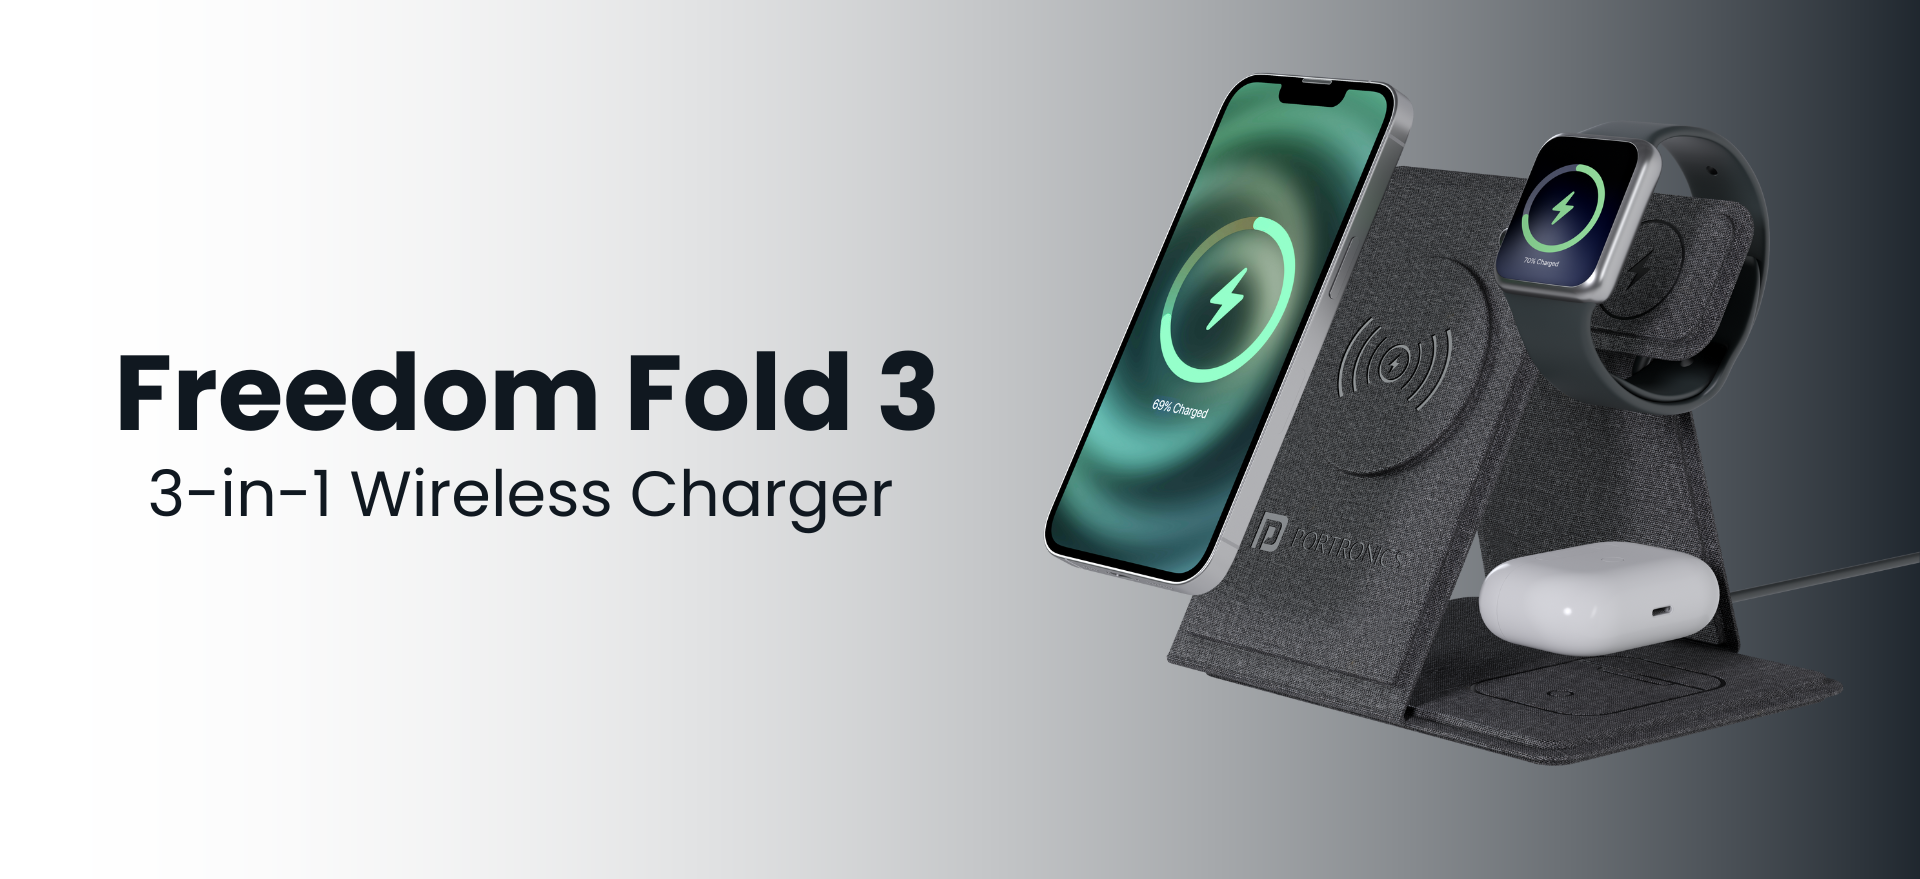 Portronics Launches Freedom Fold 3: A convenient 3-in-1 charger that saves space